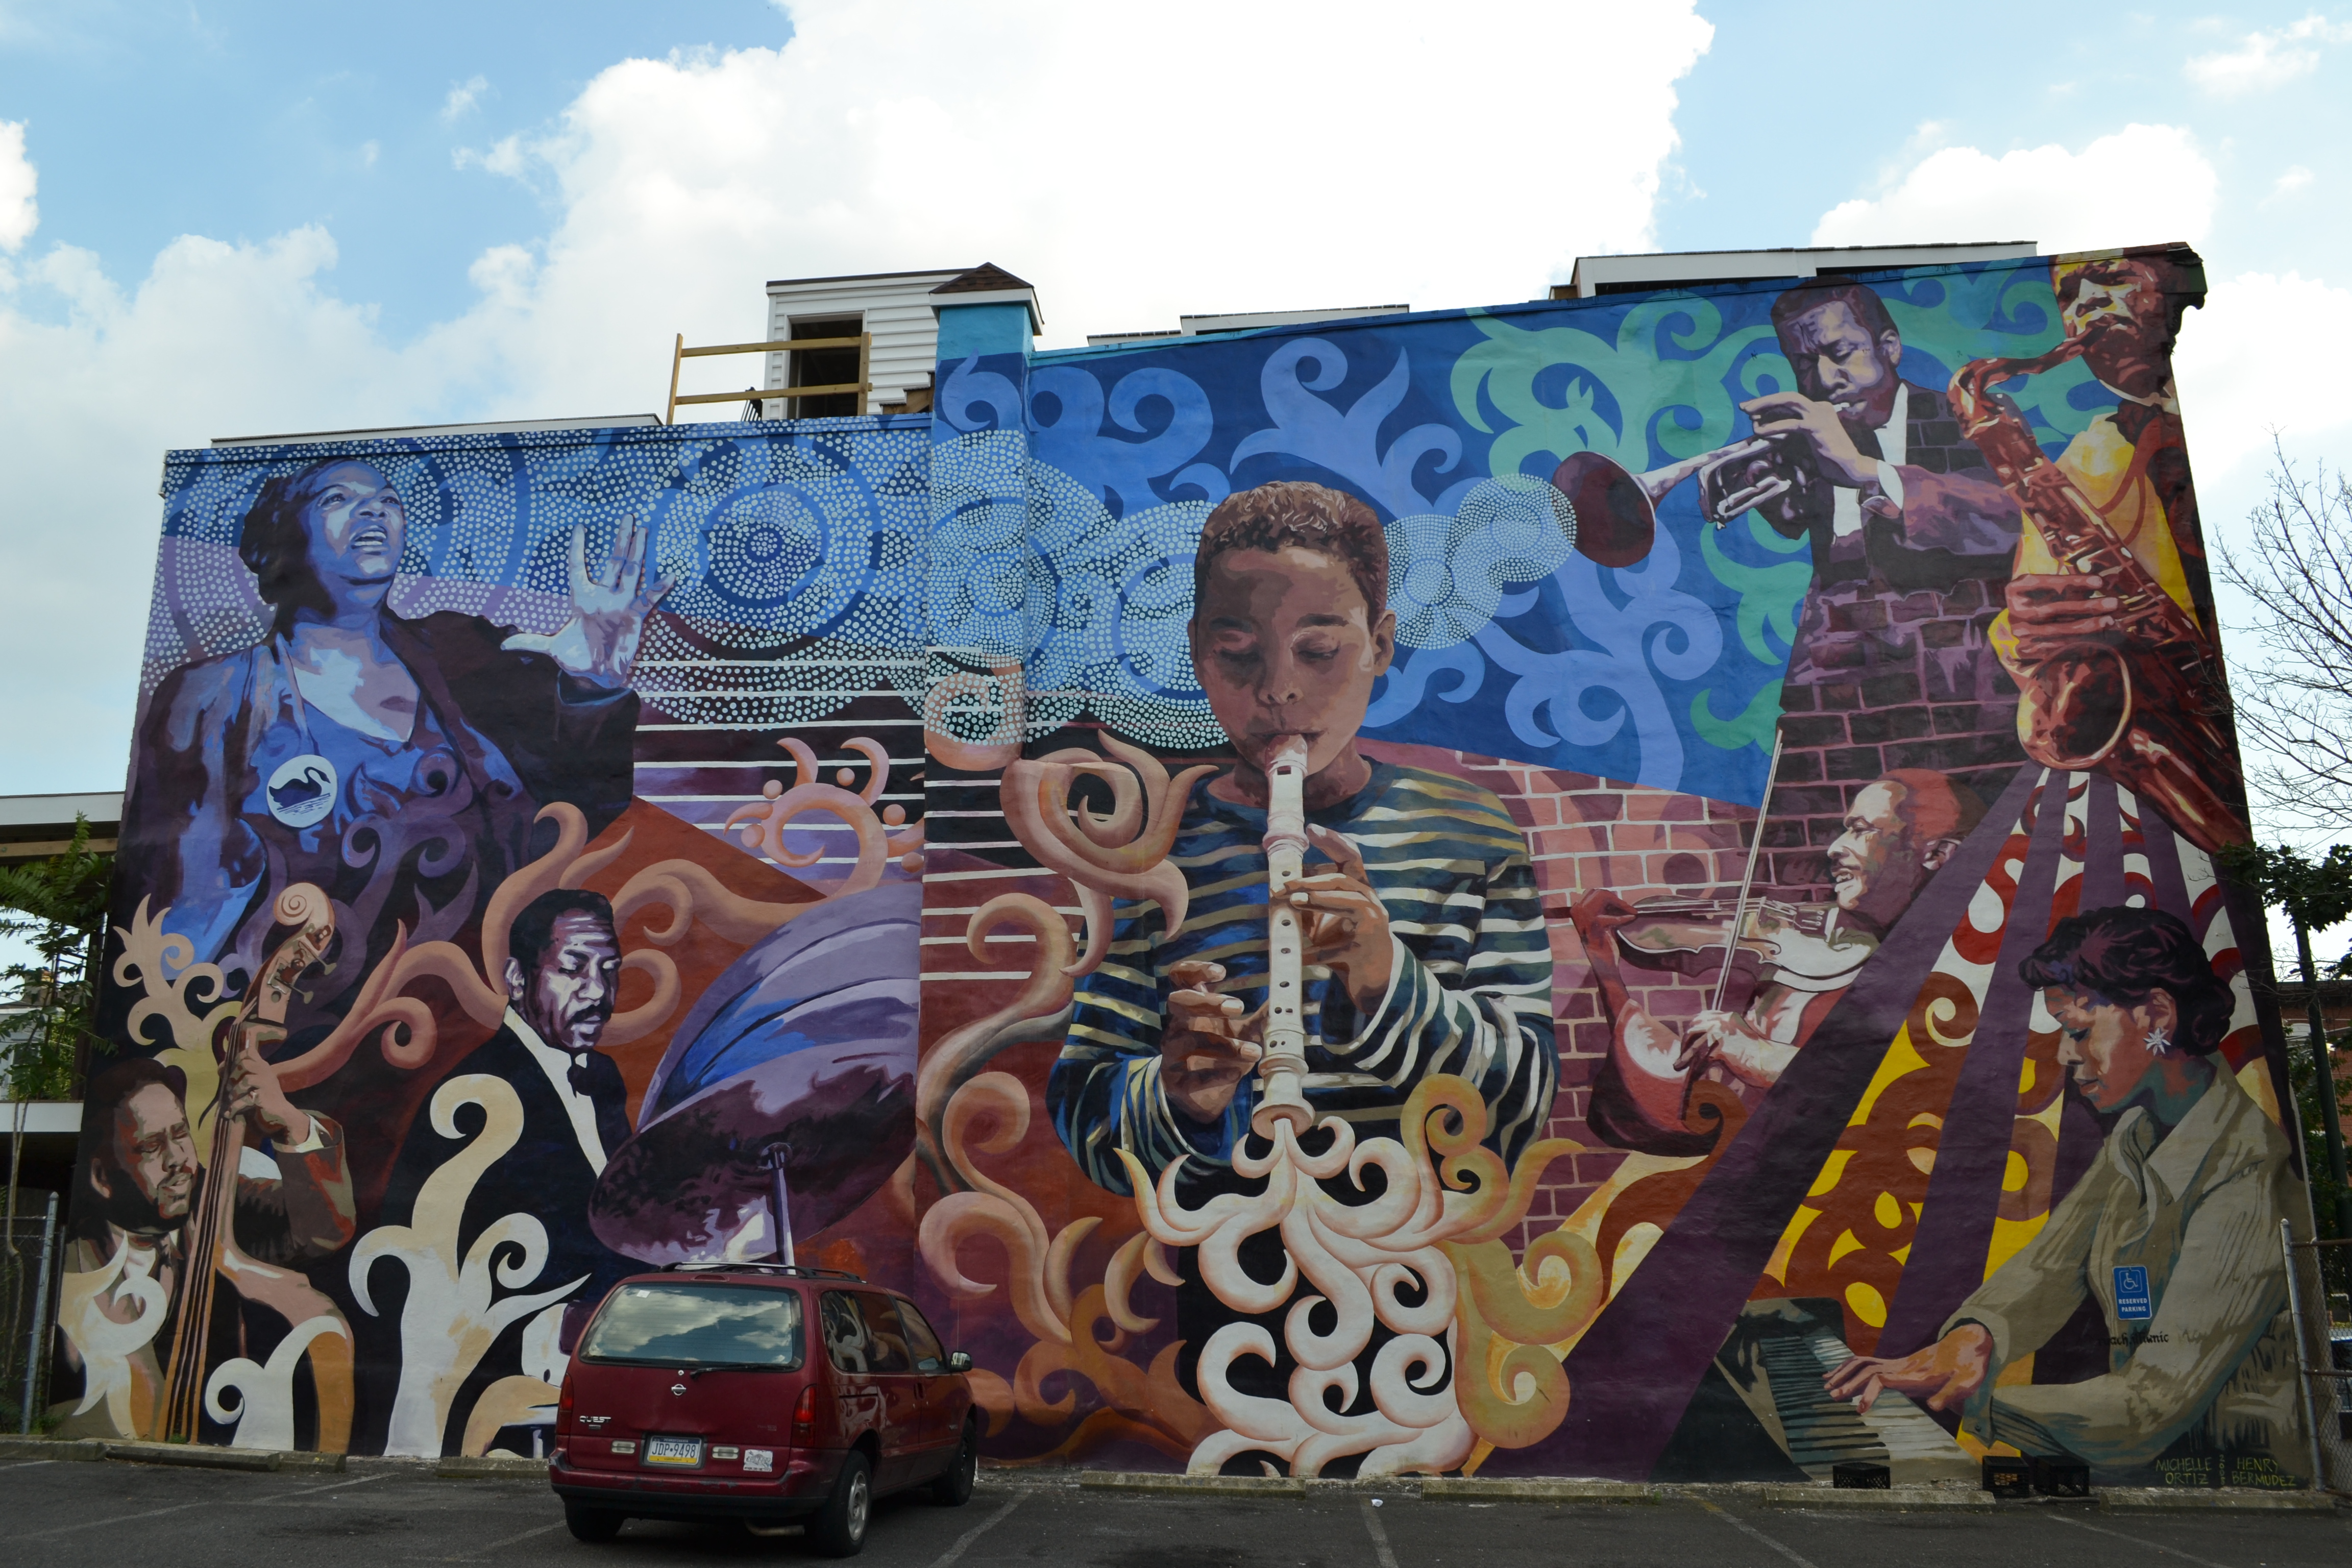 Down the street a mural pays homage to the neighborhood's rich musical culture